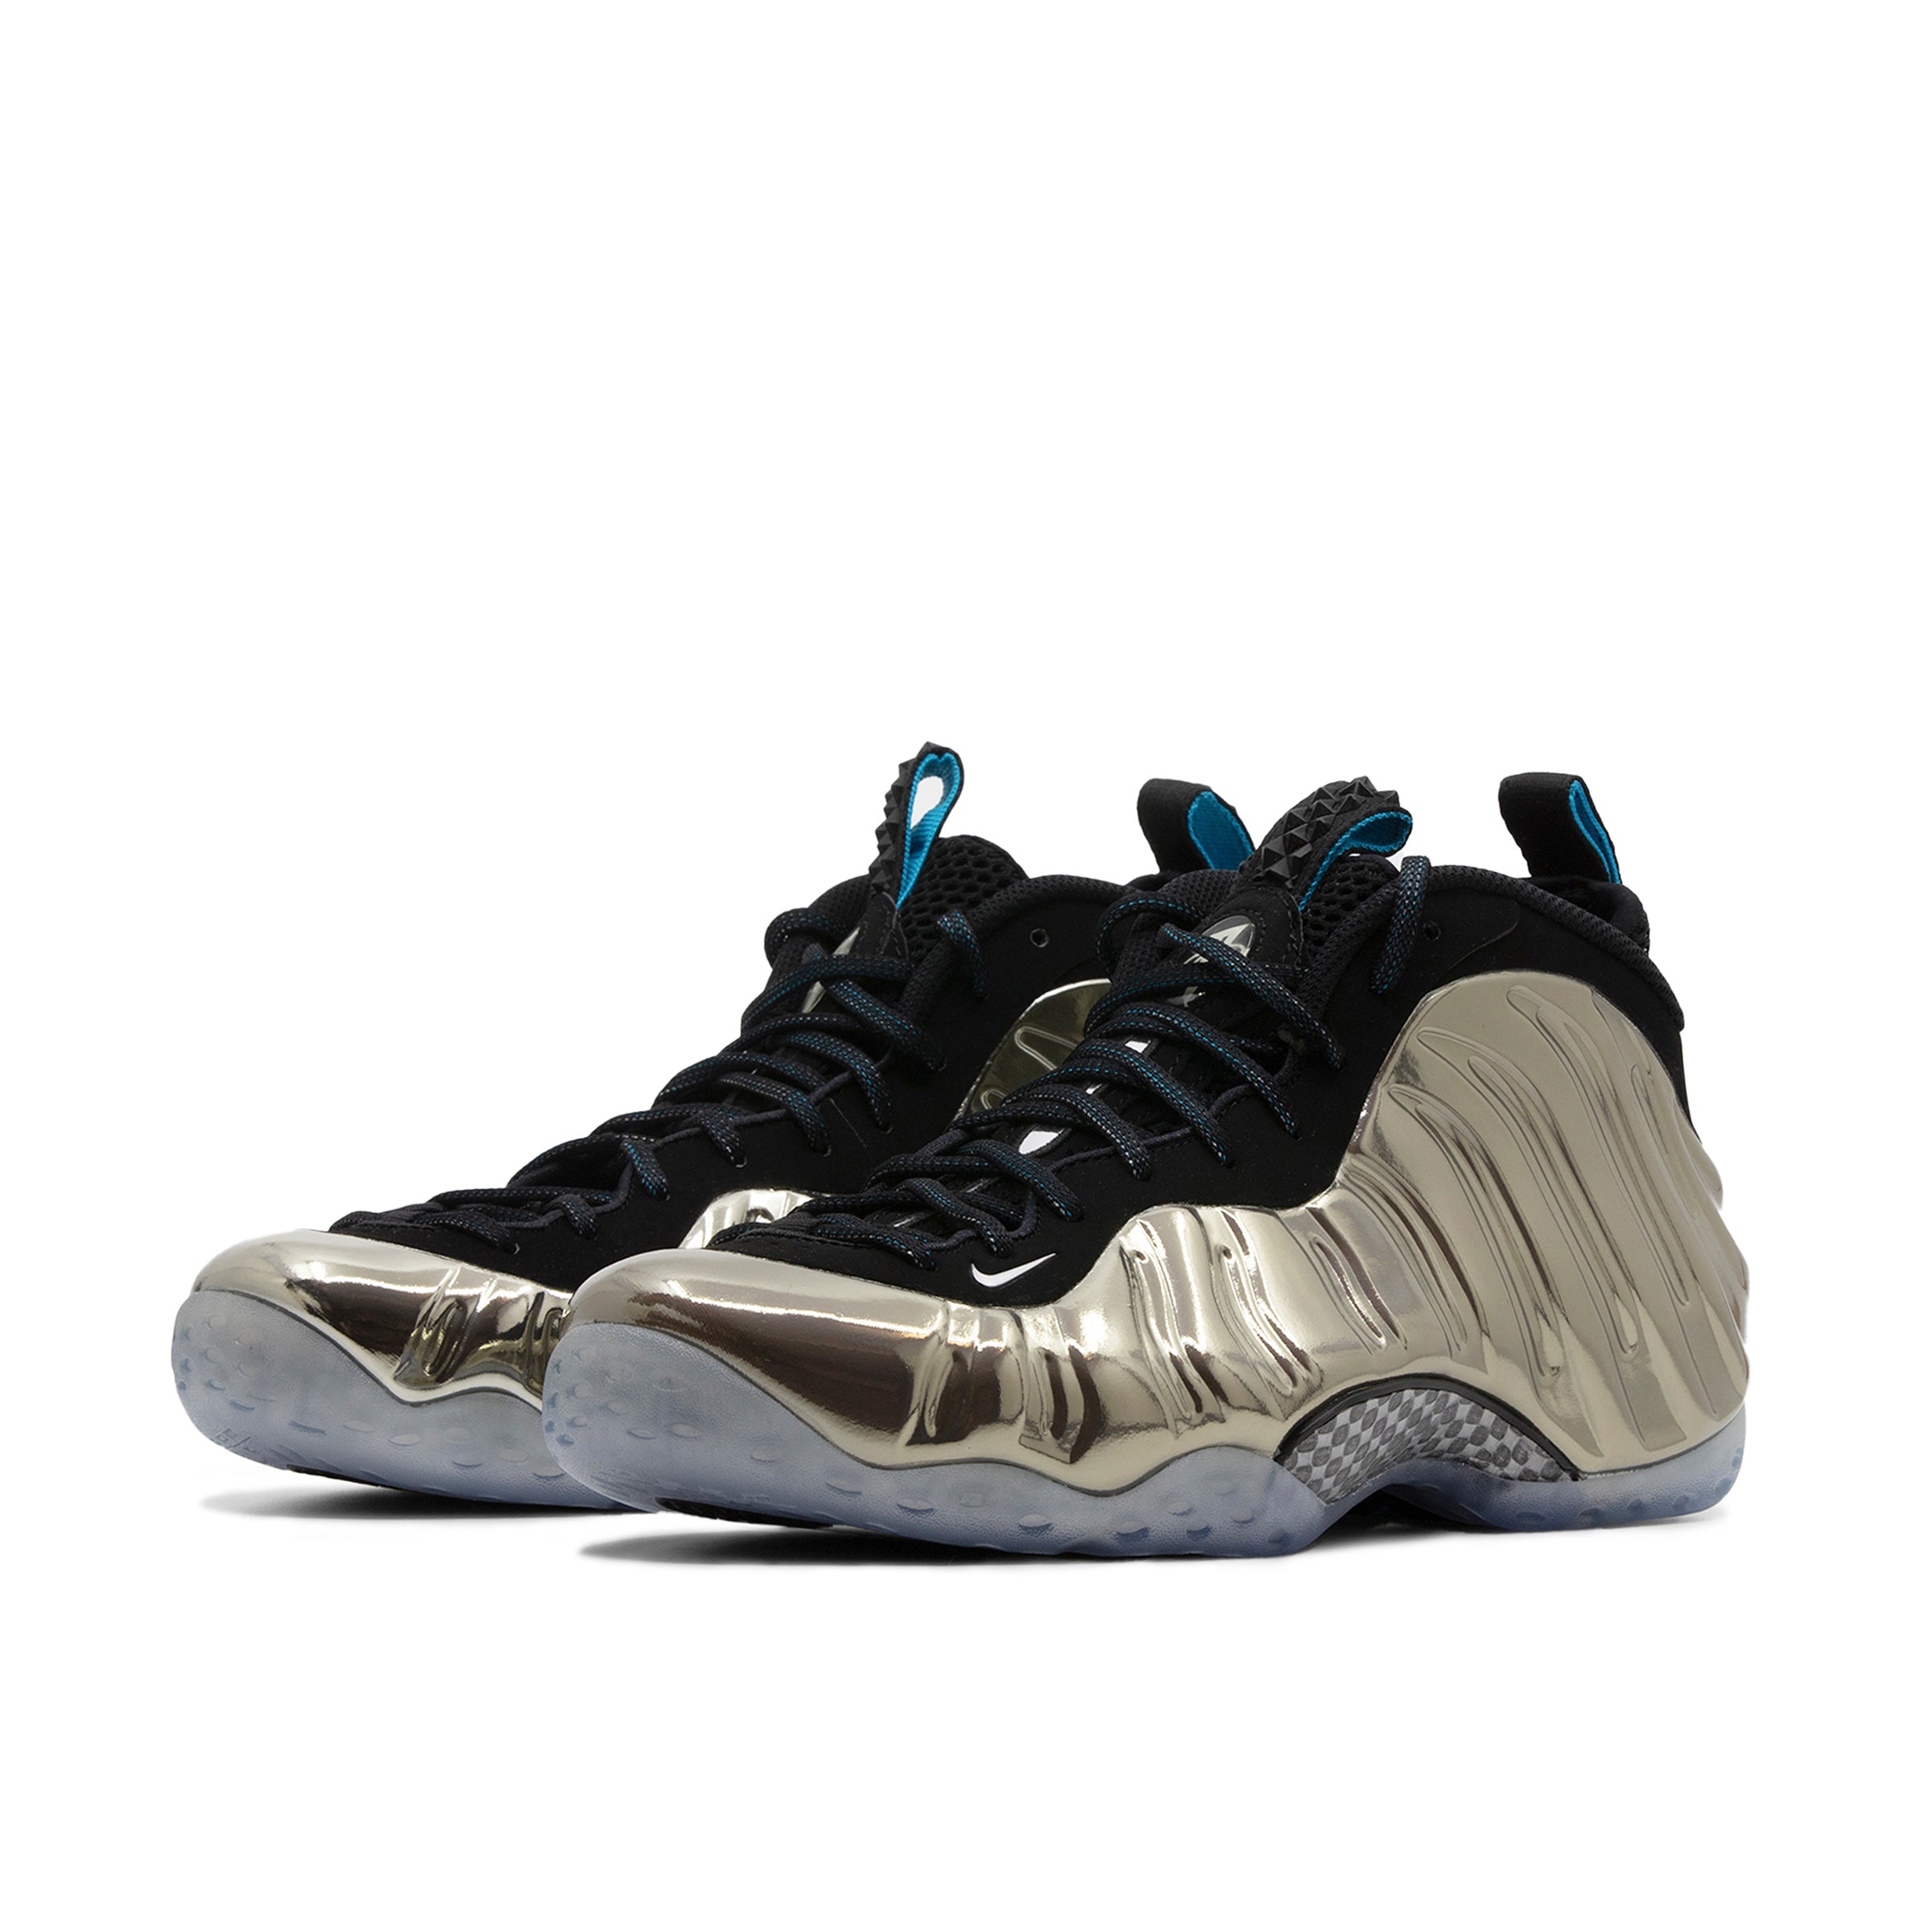 NIKE AIR FOAMPOSITE ONE ALL STAR CROMOPOSITO